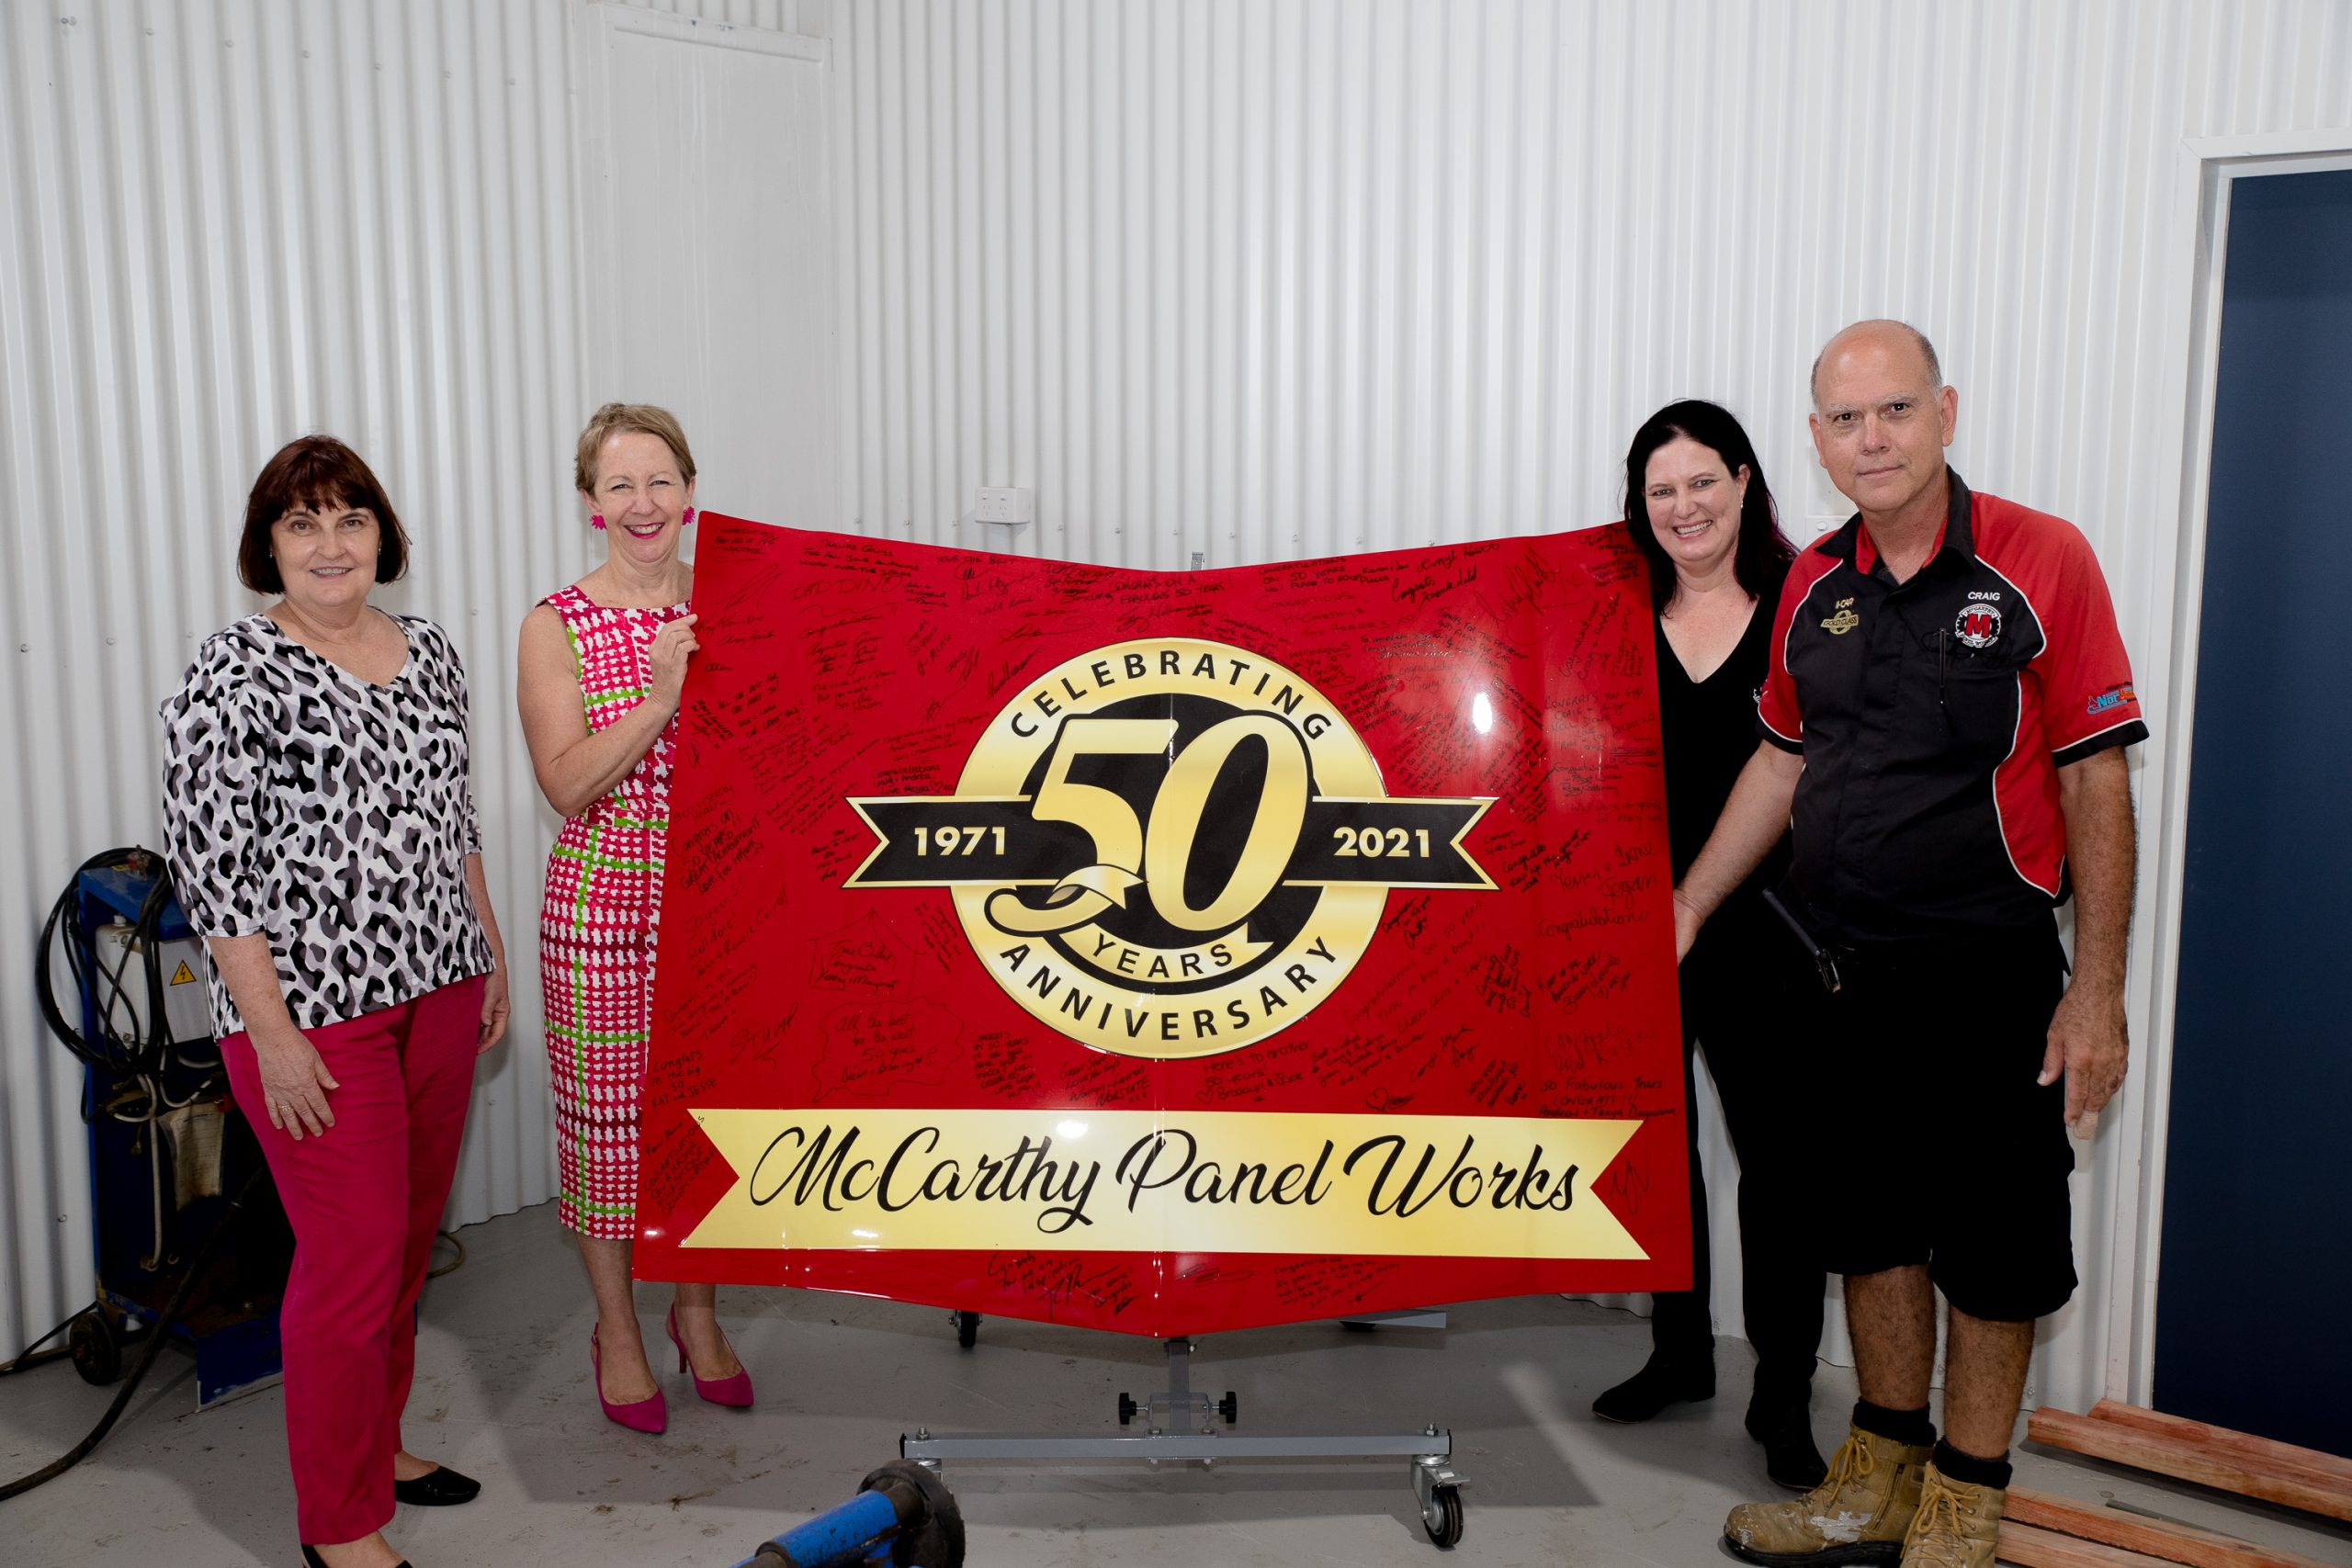 McCarthy Panel Works, celebrating 50 years! with Member for Mackay, Julianne Gilbert and the Honourable Di Farmer MP.